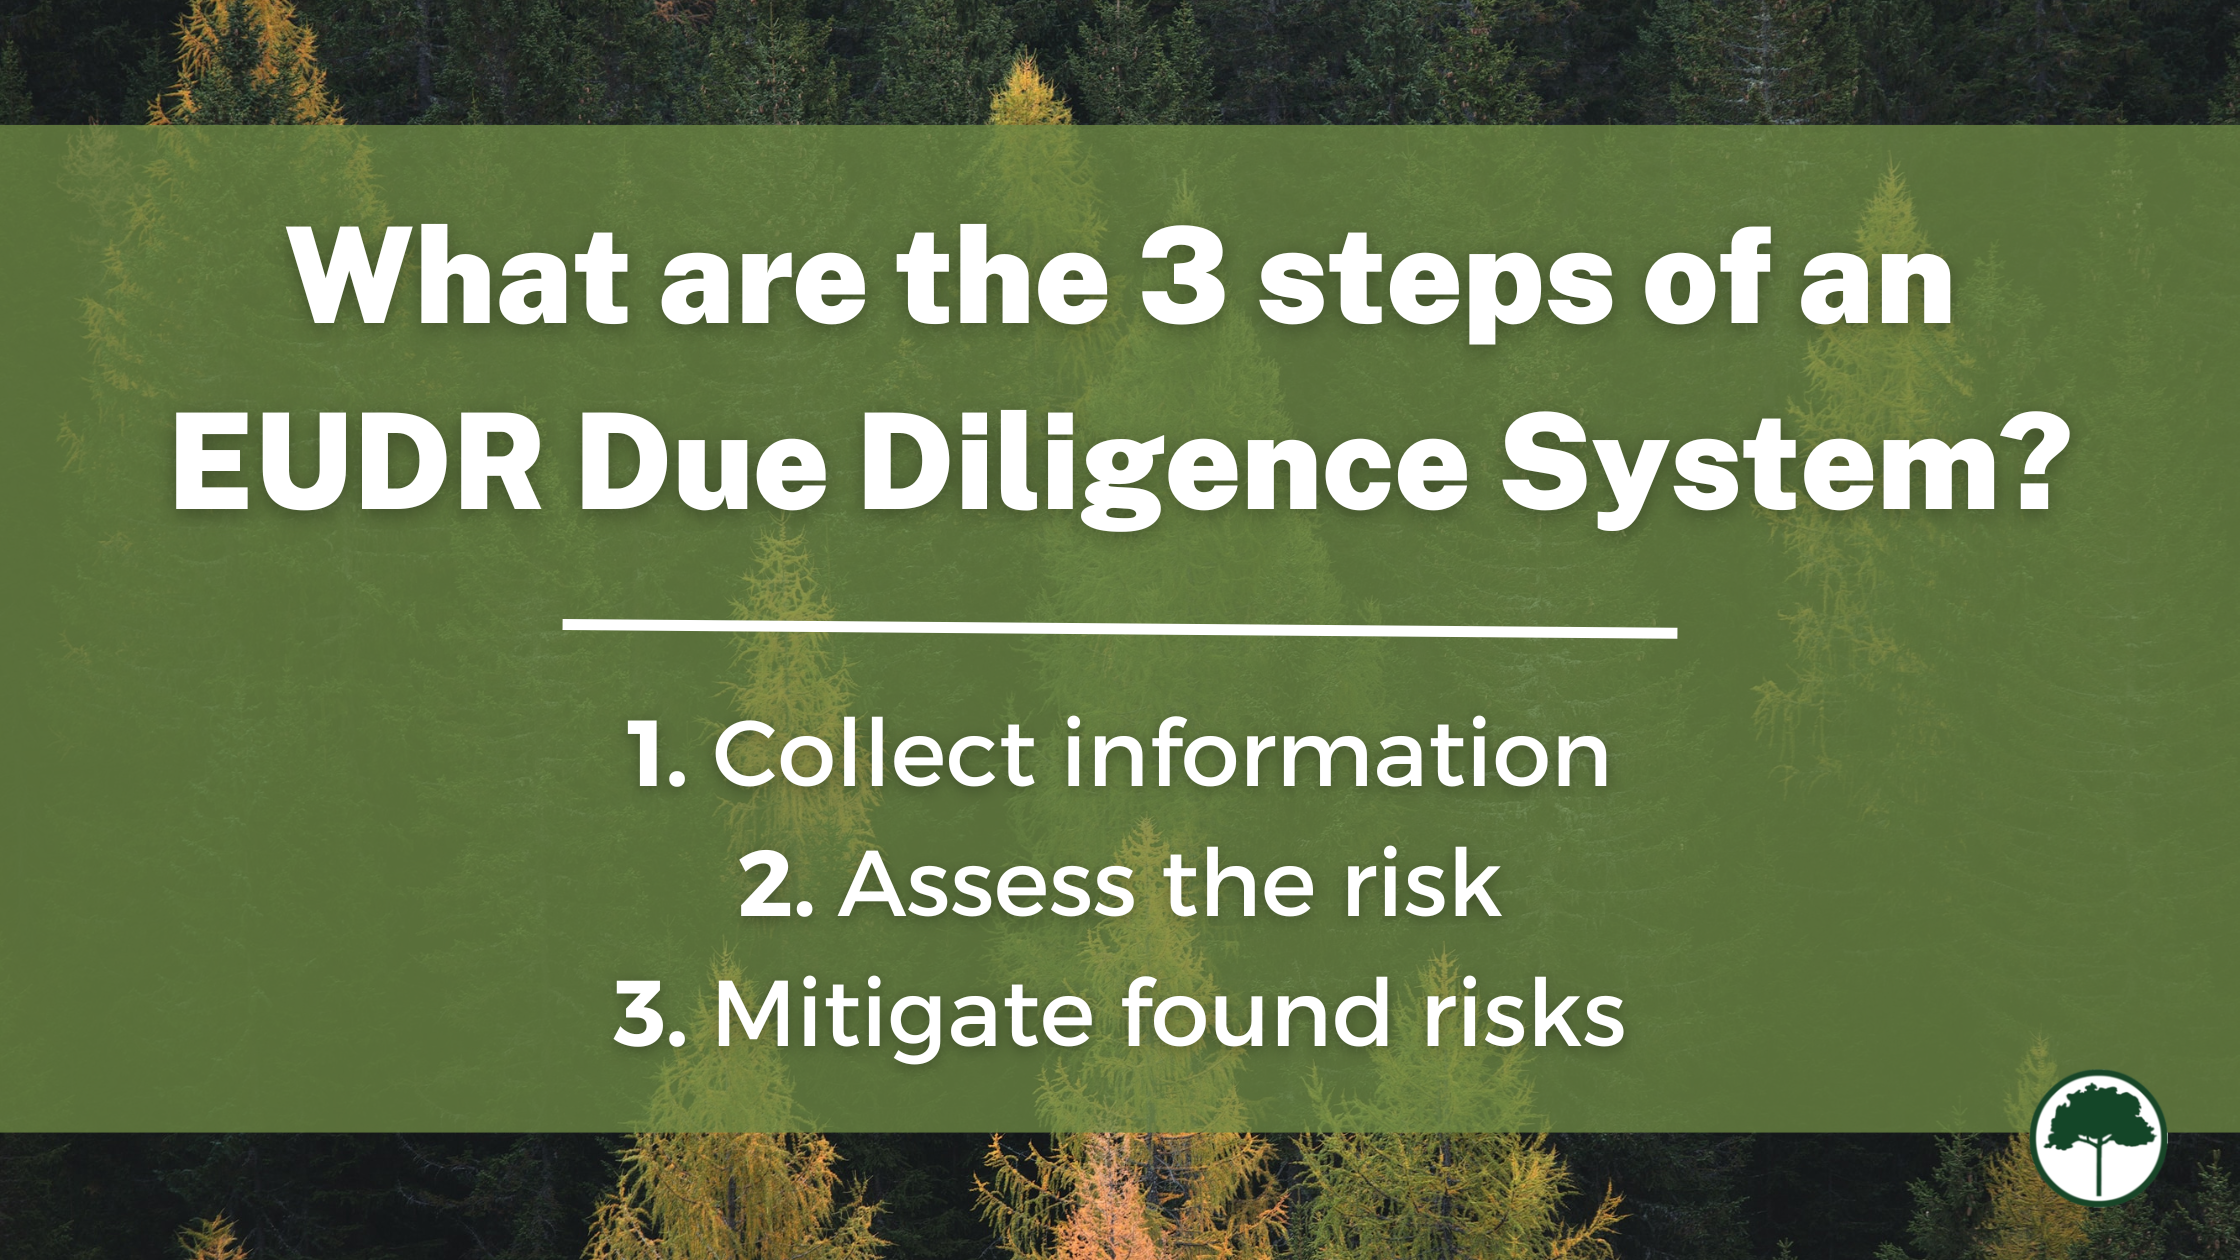 What are the 3 steps of an EUDR Due Diligence System? 1. Collect information, 2. Assess the risk, 3. Mitigate found risks